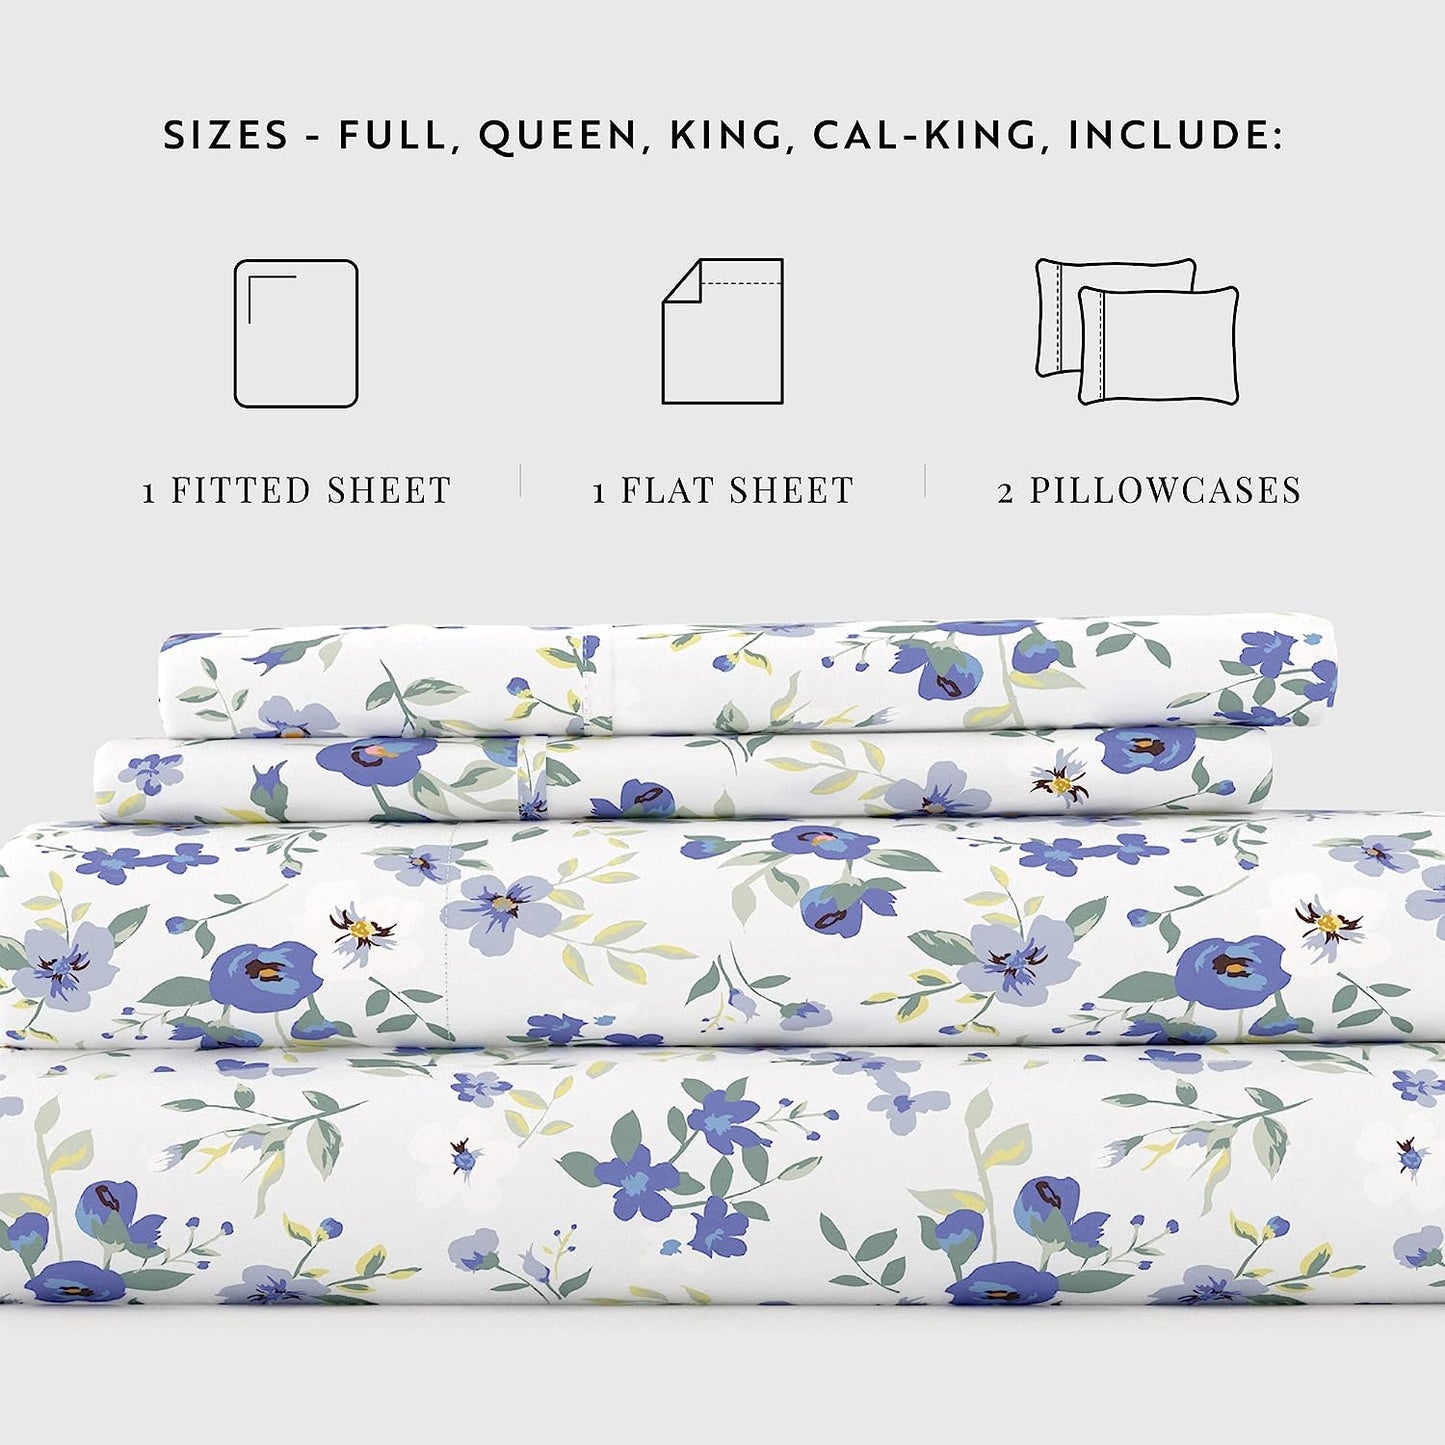 Linen Market 4 Piece King Bedding Sheet Set (Light Blue Floral) - Sleep Better Than Ever with These Ultra-Soft & Cooling Bed Sheets for Your King Size Bed - Deep Pocket Fits 16" Mattress